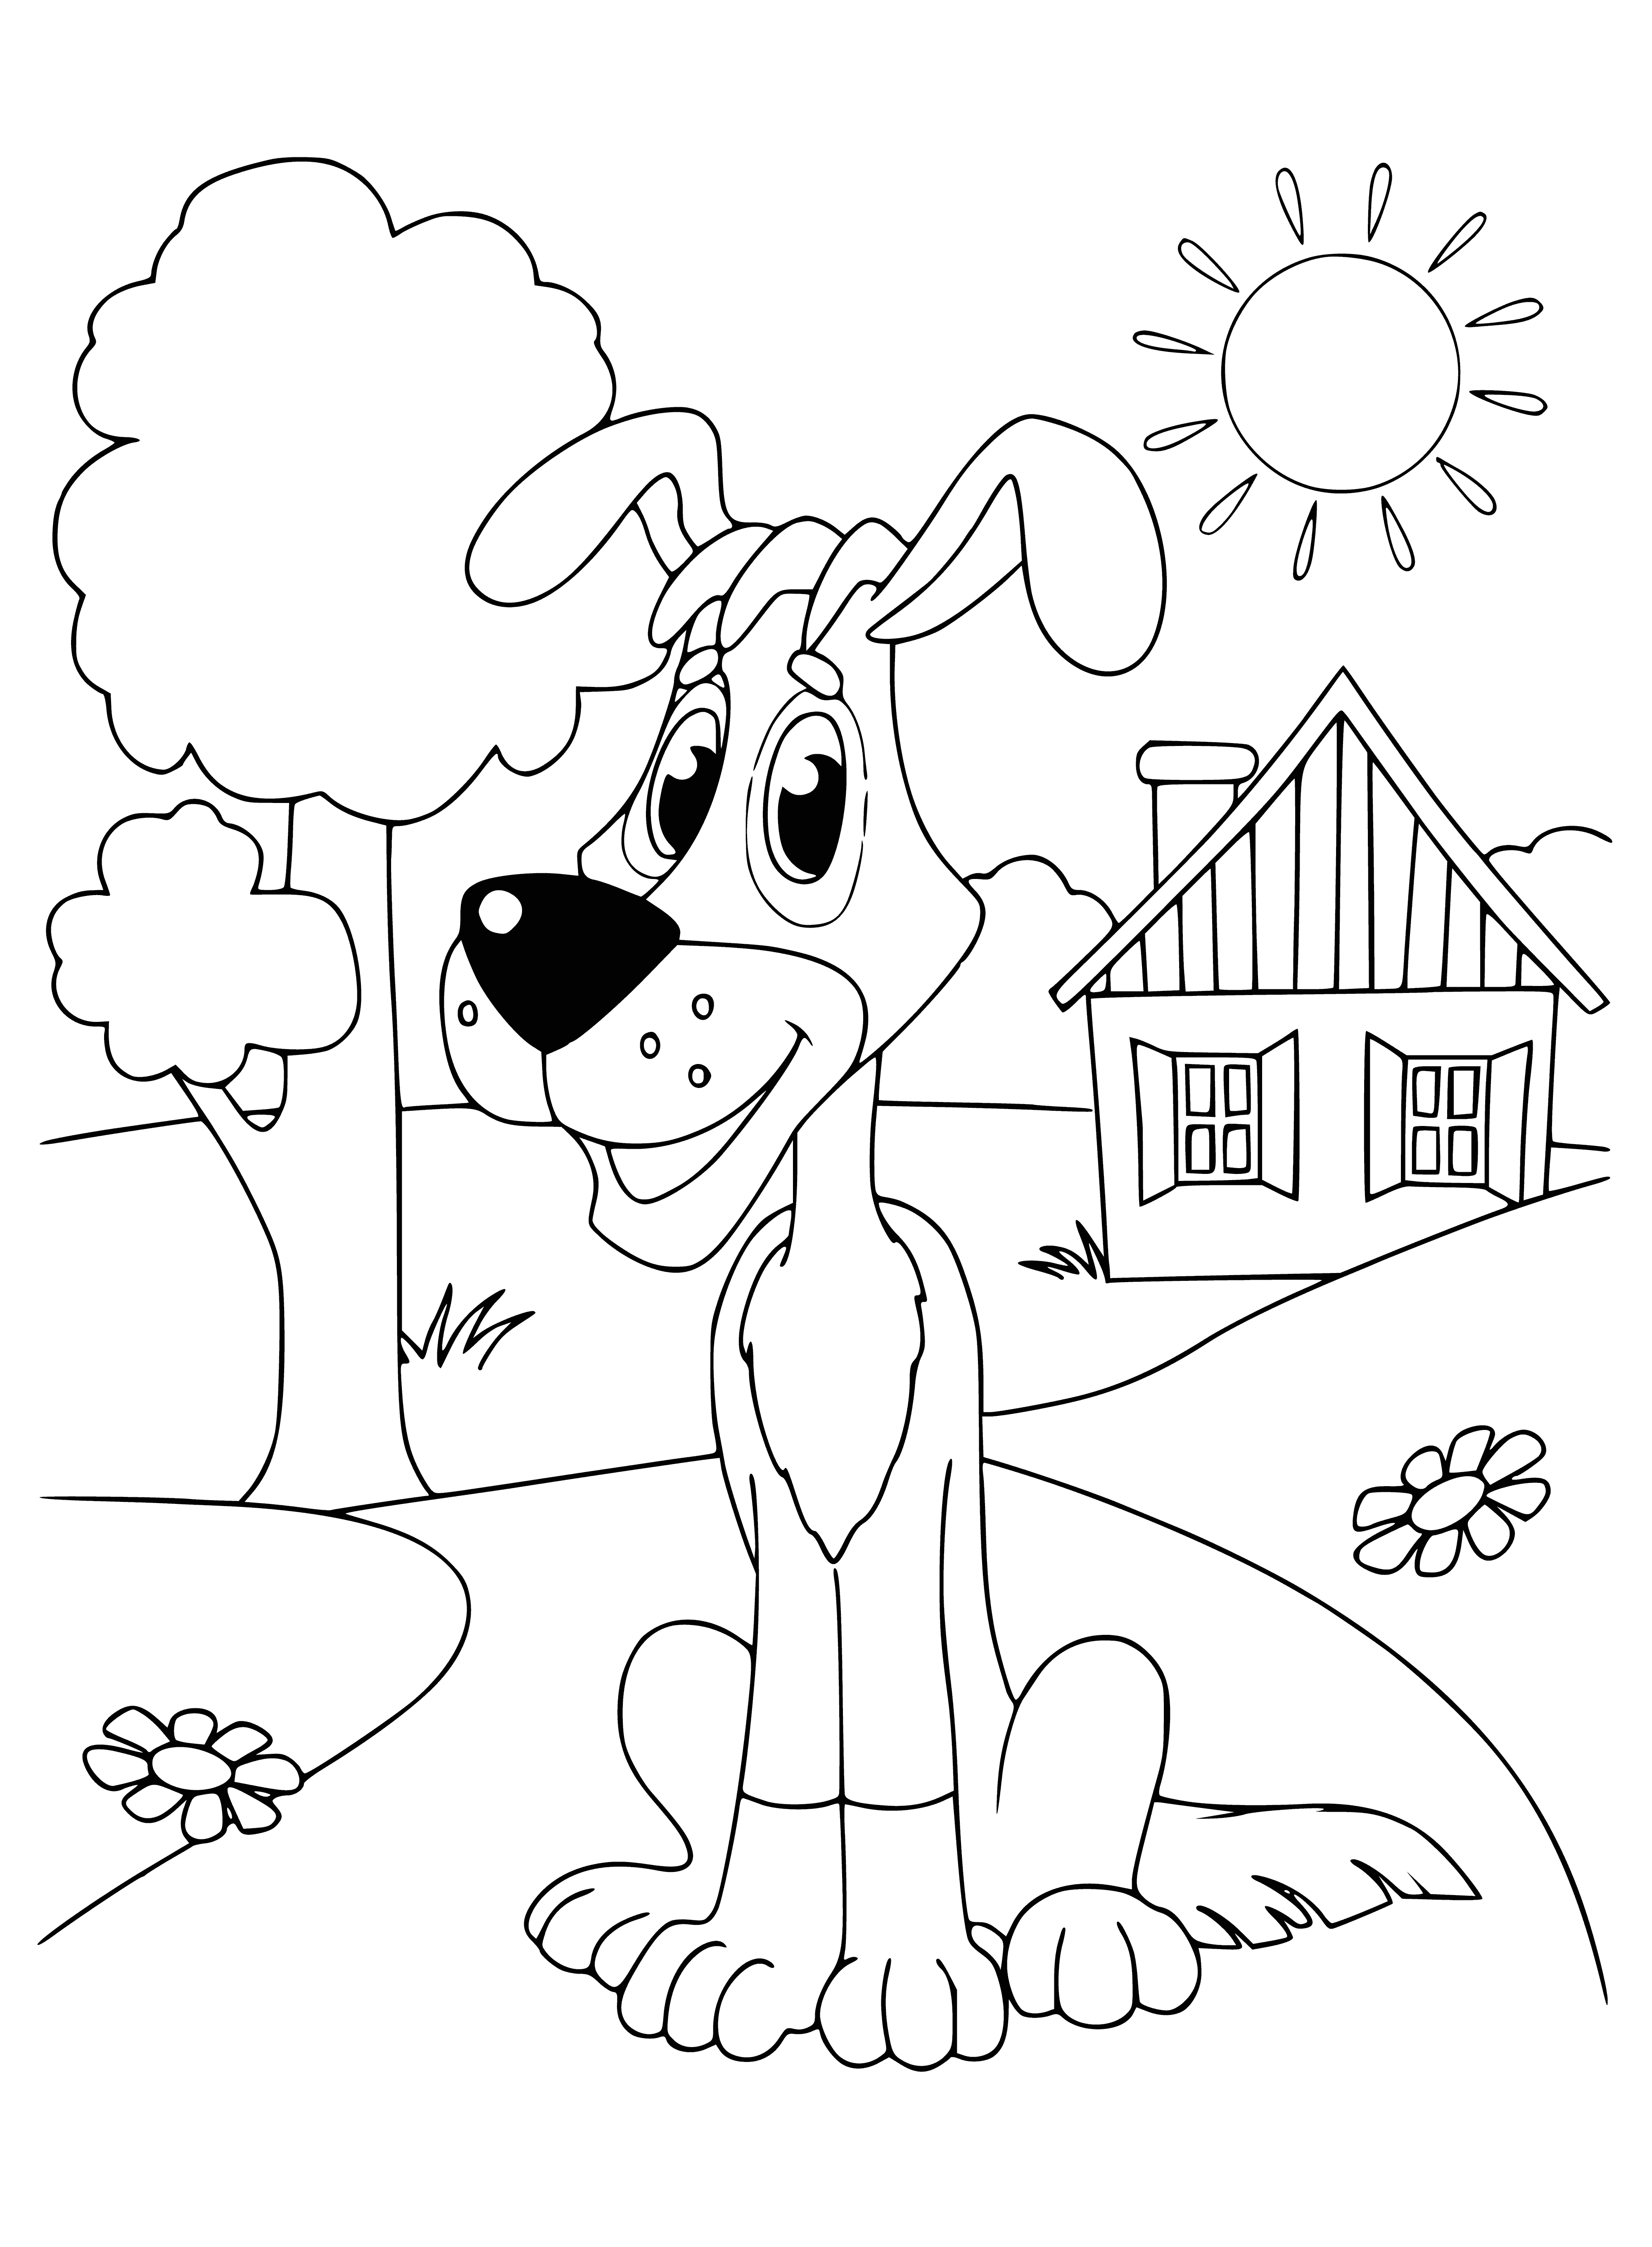 coloring page: Dog in coloring page: brown/white, facing left, blue background.